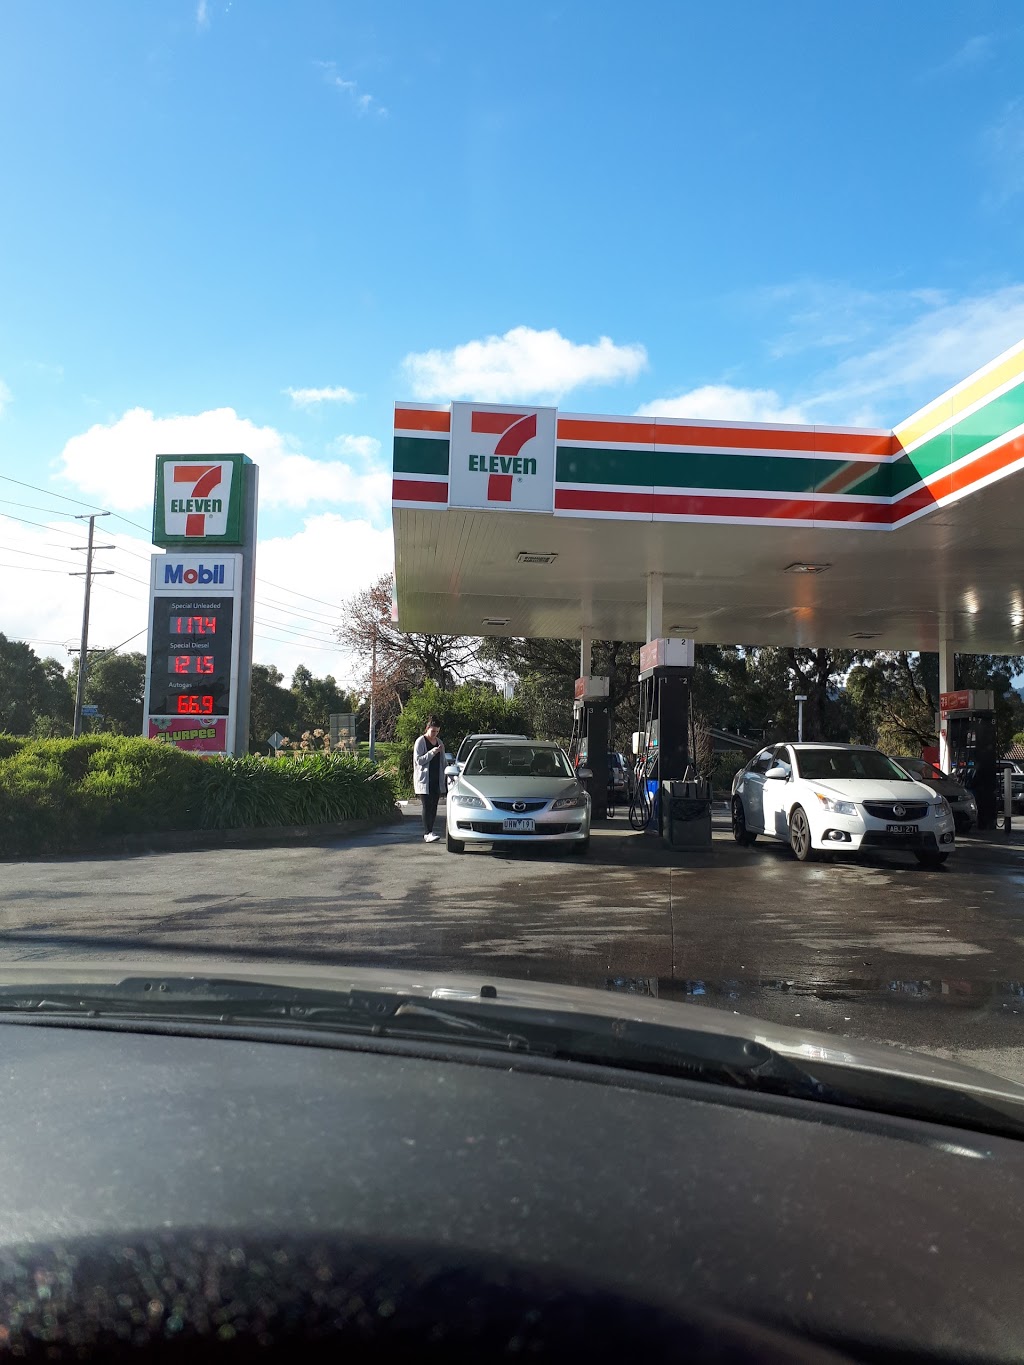 7-Eleven Ferntree Gully | 510 Napoleon Rd &, Lakesfield Dr, Ferntree Gully VIC 3156, Australia | Phone: (03) 9753 9438